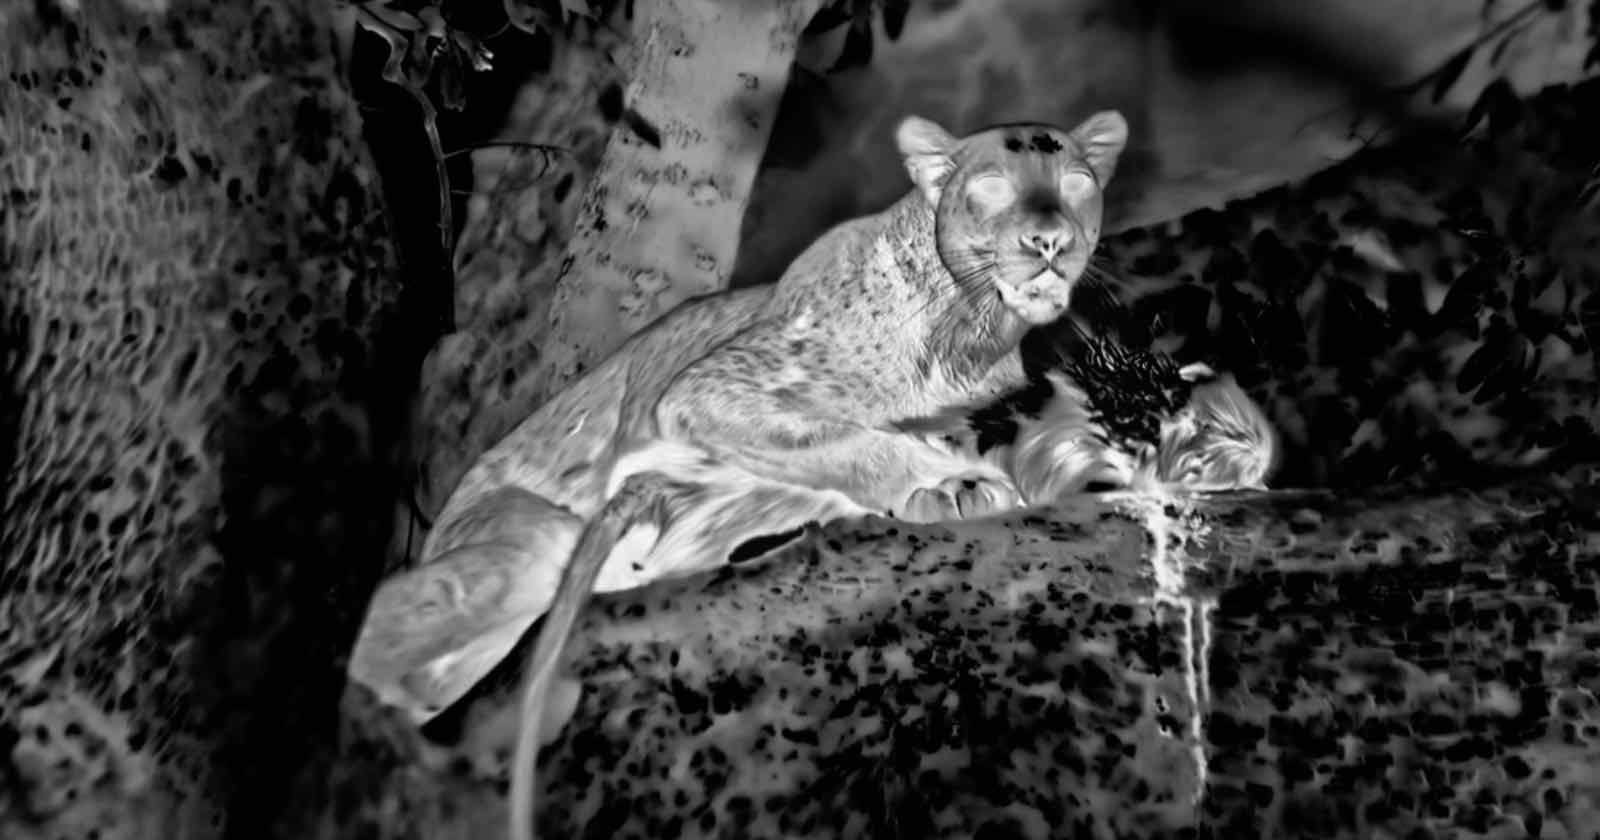 Night Vision Camera Films Leopard Hunting Baboons in World-First Footage